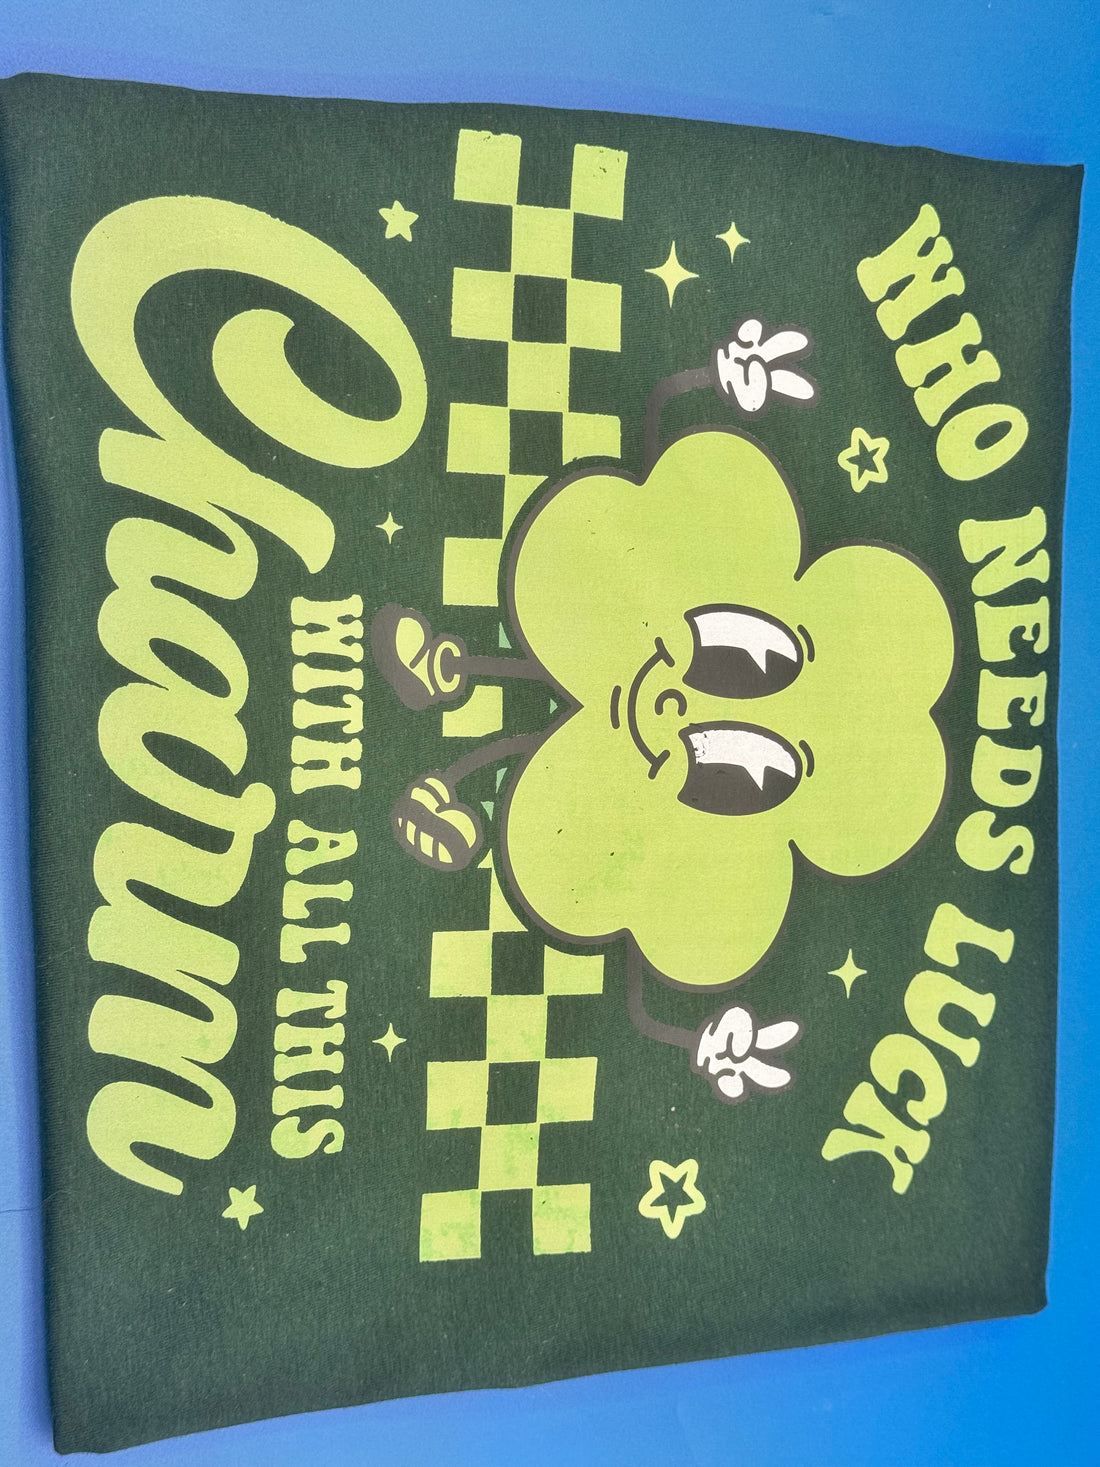 T-Shirt with 4 Leaf Clover “Who Needs Luck with all this Charm” Design